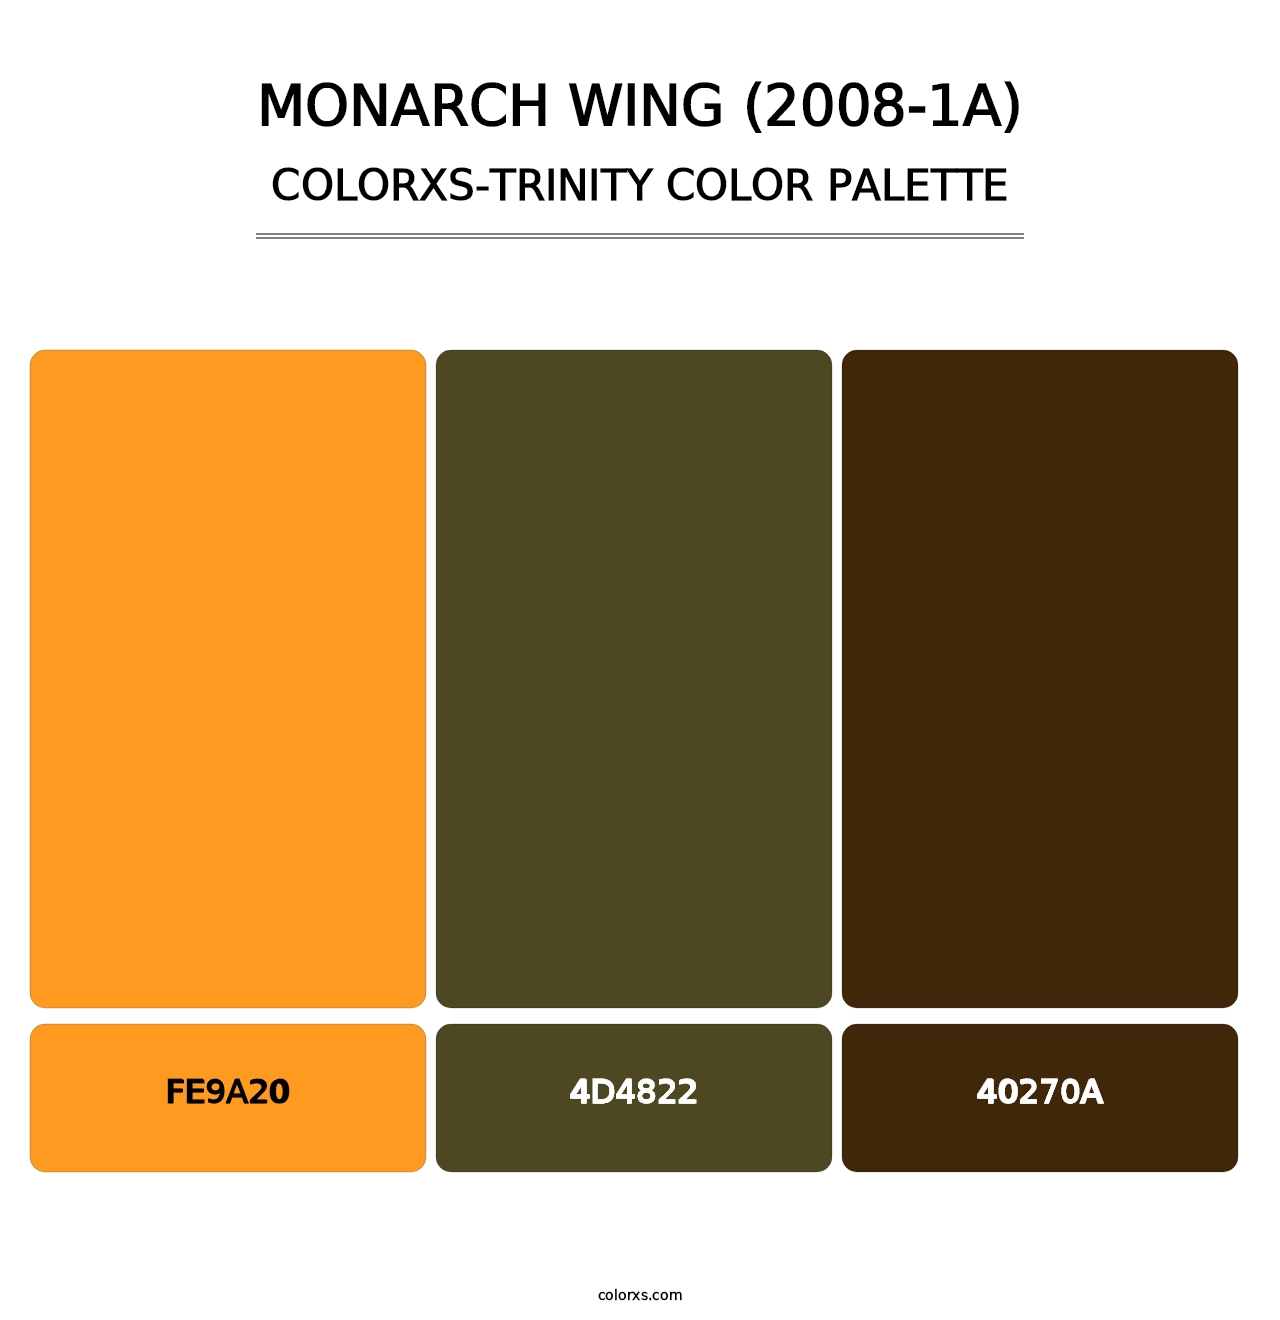 Monarch Wing (2008-1A) - Colorxs Trinity Palette